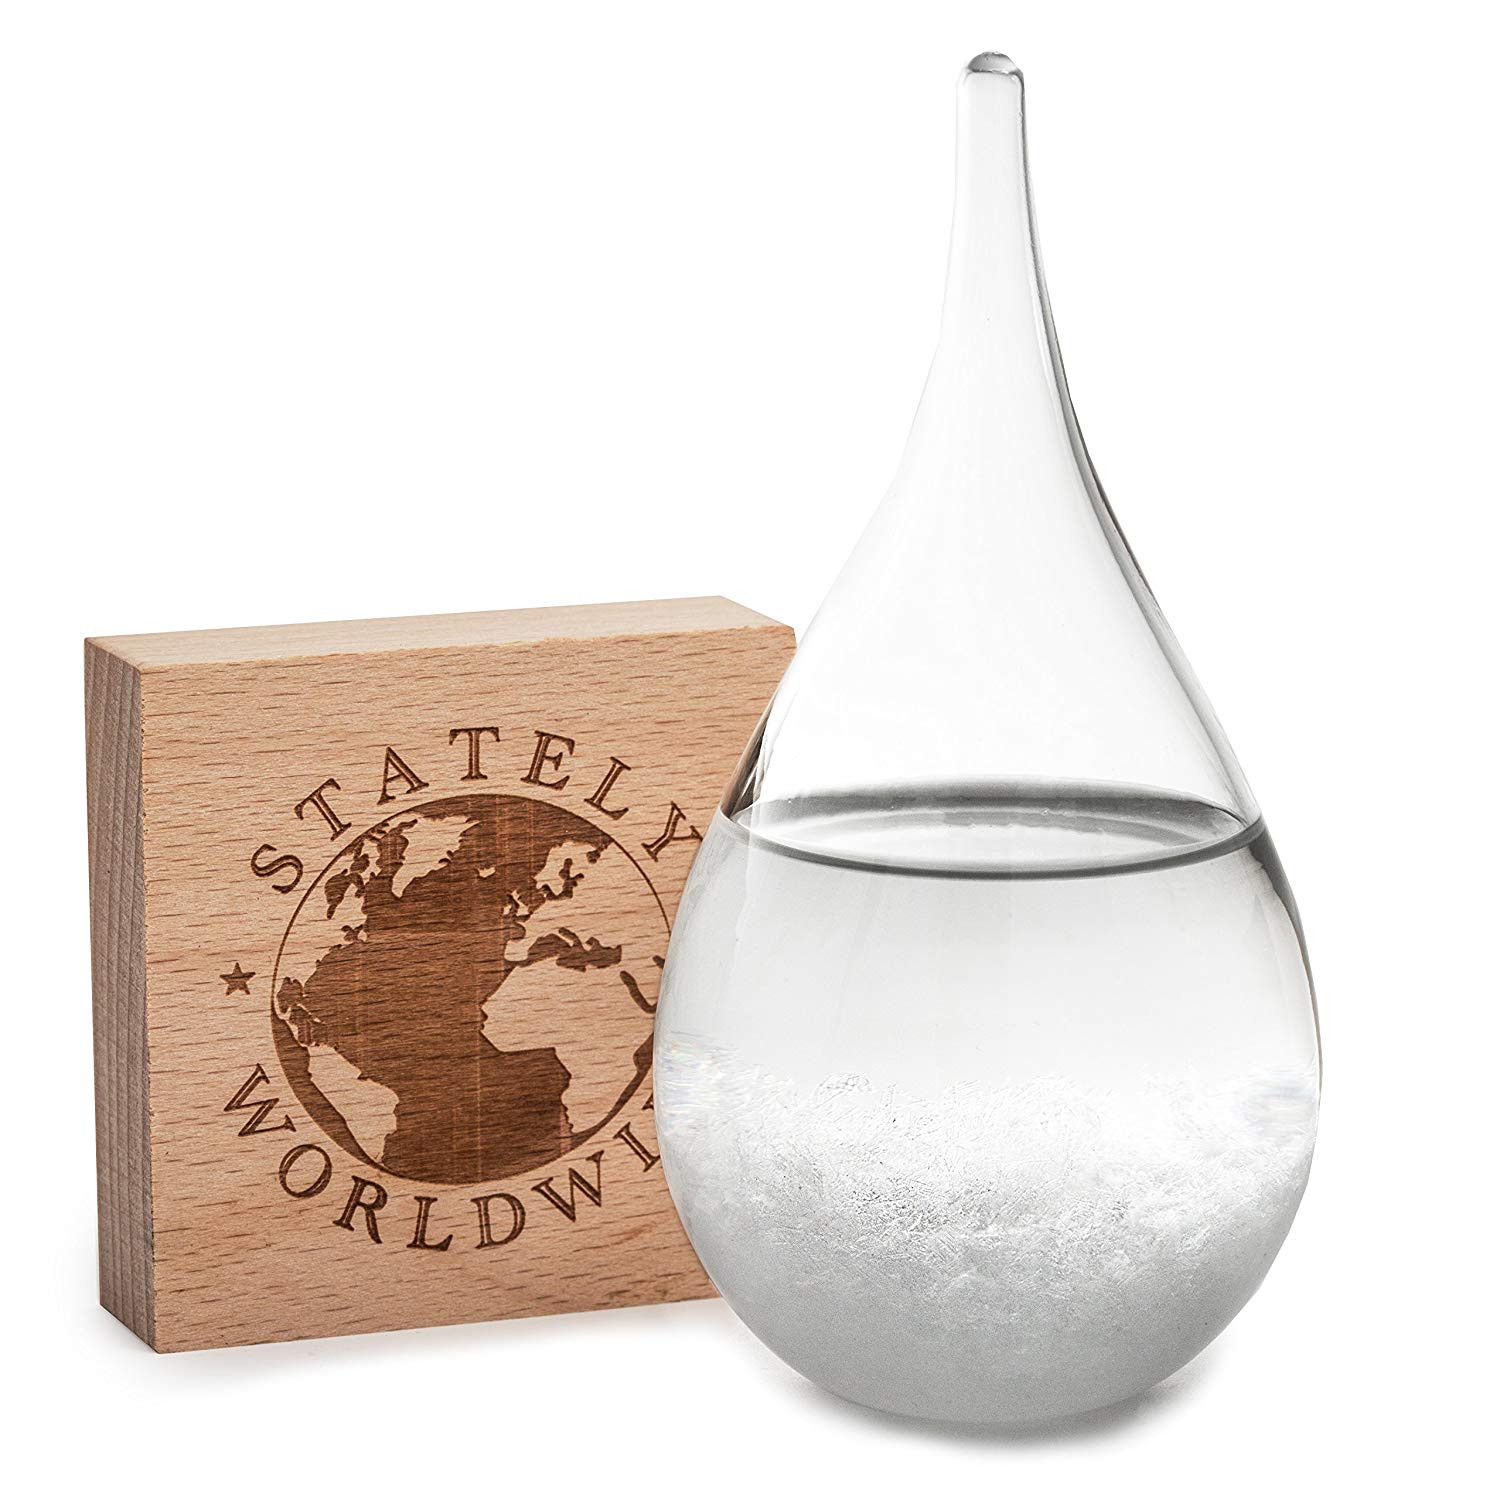 13 Fashionable Glass Vase with Wooden Base 2024 free download glass vase with wooden base of amazon com storm glass weather predictor fitzroy barometer set with with regard to amazon com storm glass weather predictor fitzroy barometer set with wood bas